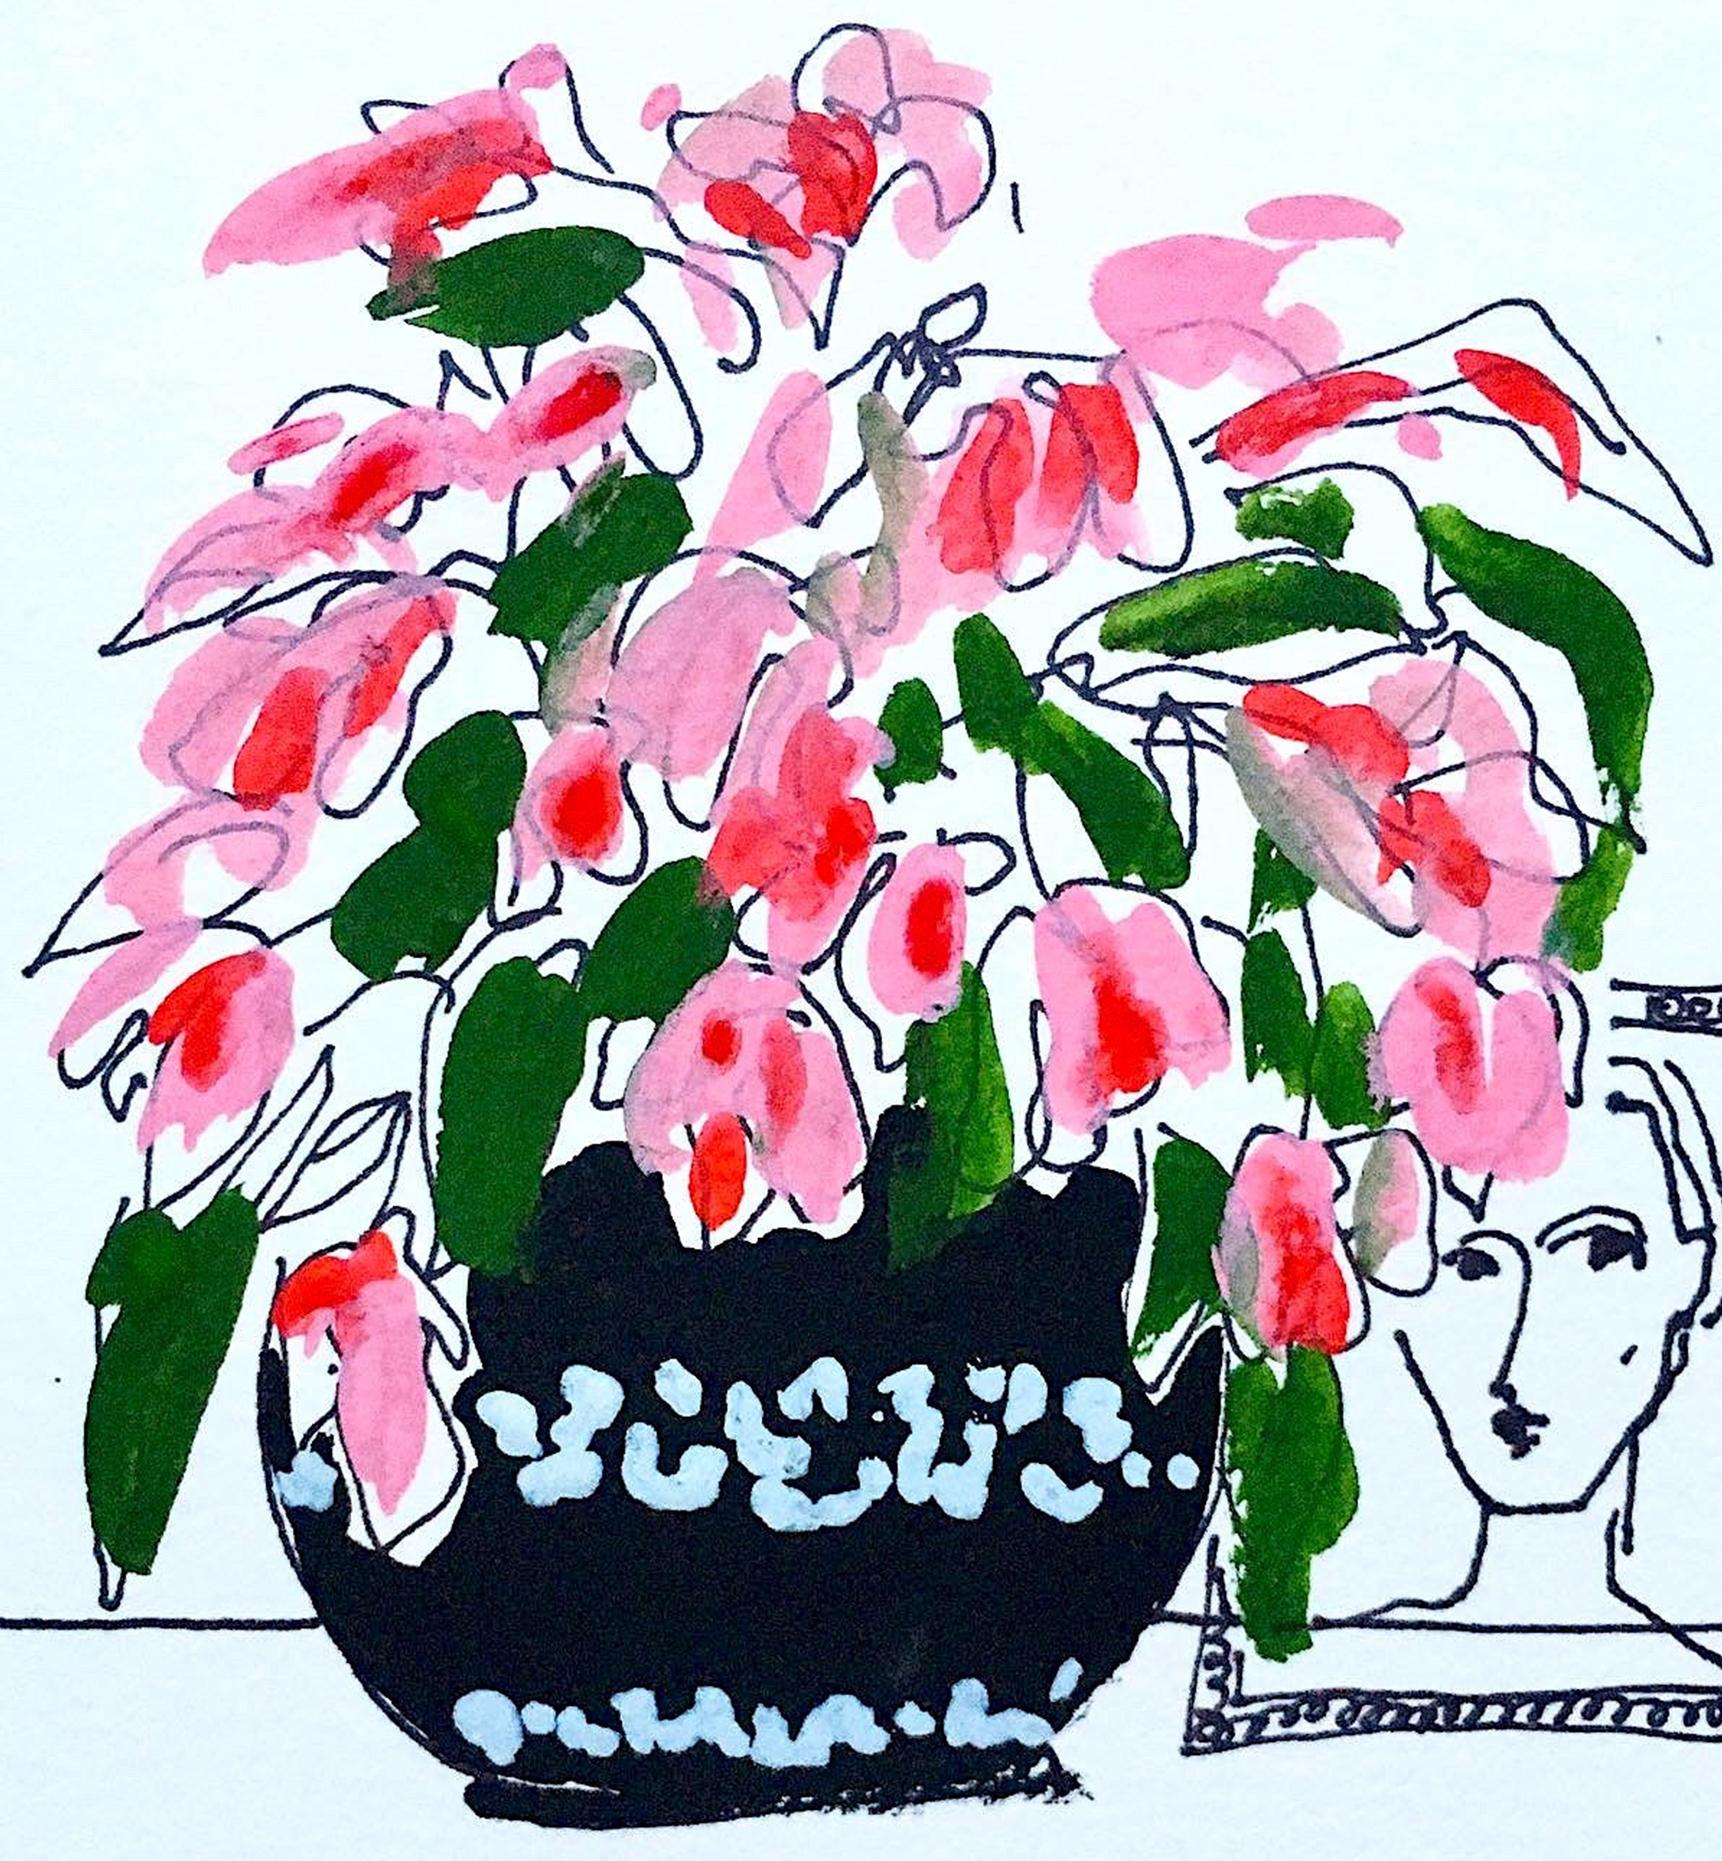 Flower vase, pink by Manuel Santelices
Dimensions: 8 in. H x 6 in. W 
Watercolor and archival paper
2016


Manuel Santelices explores the world of fashion, society and pop culture through his illustrations. A Chilean artist and journalist